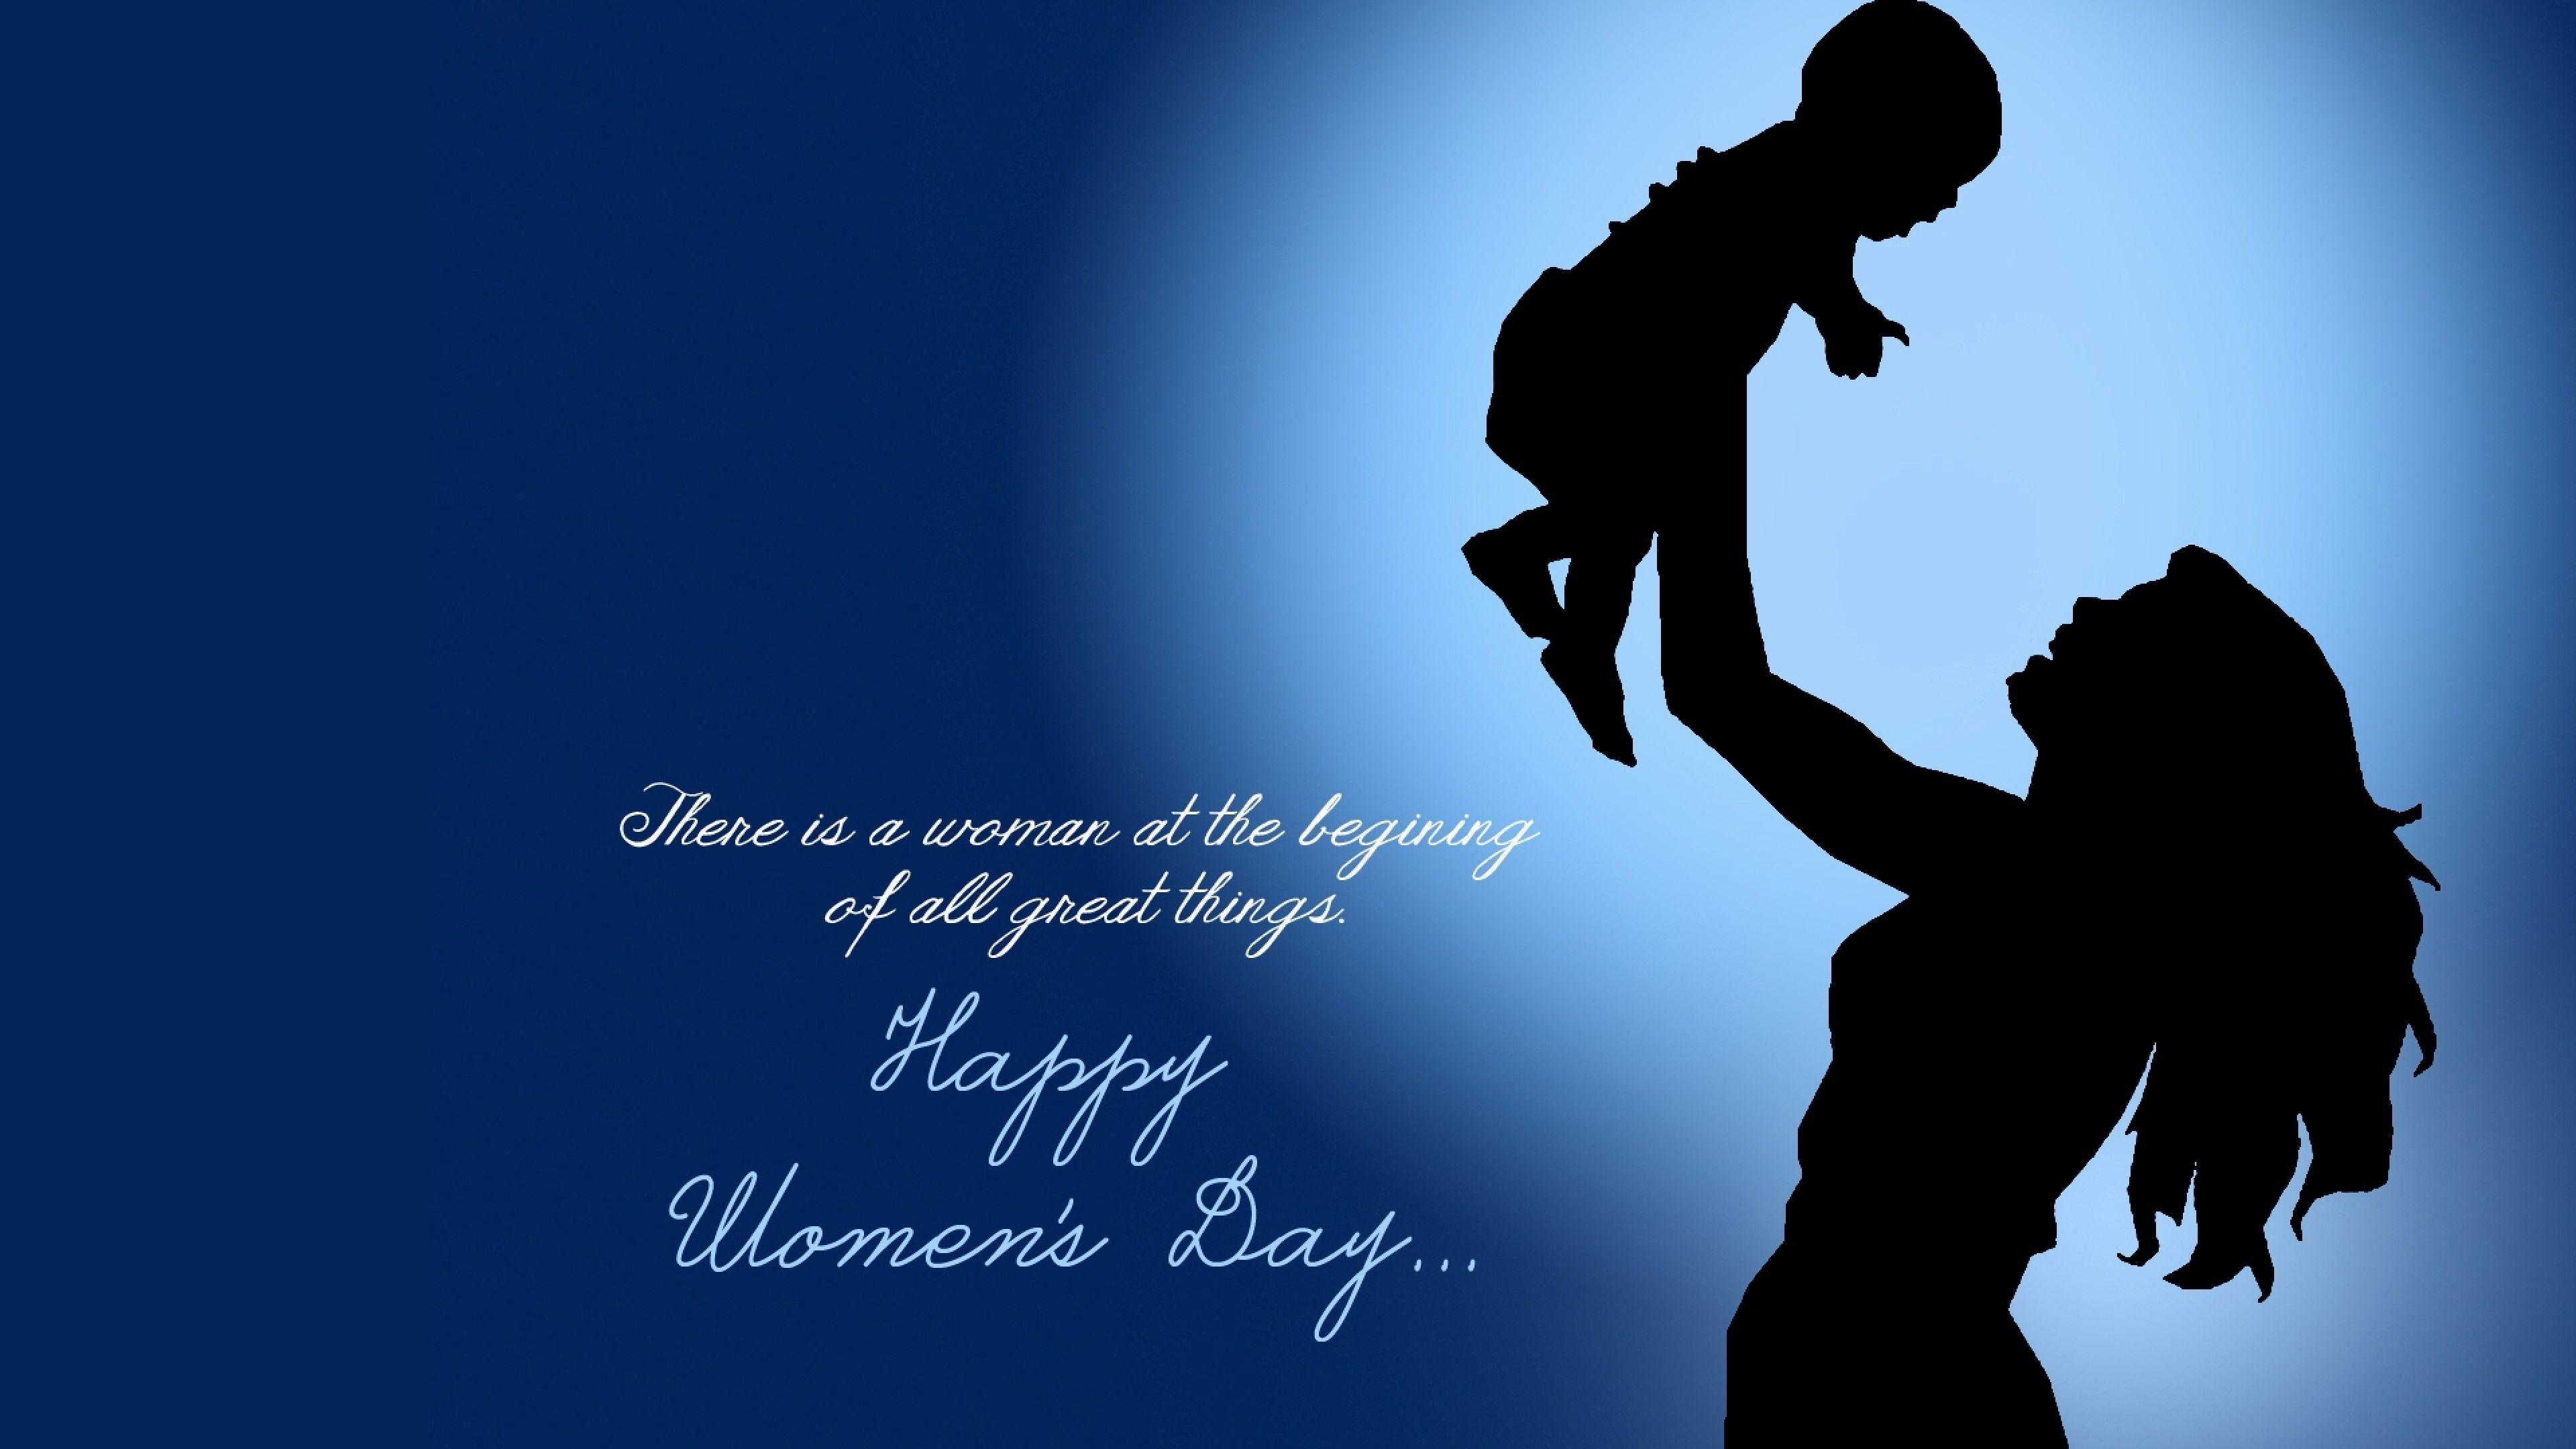 Happy Womens Day Wallpaper: Find best latest Happy Womens Day